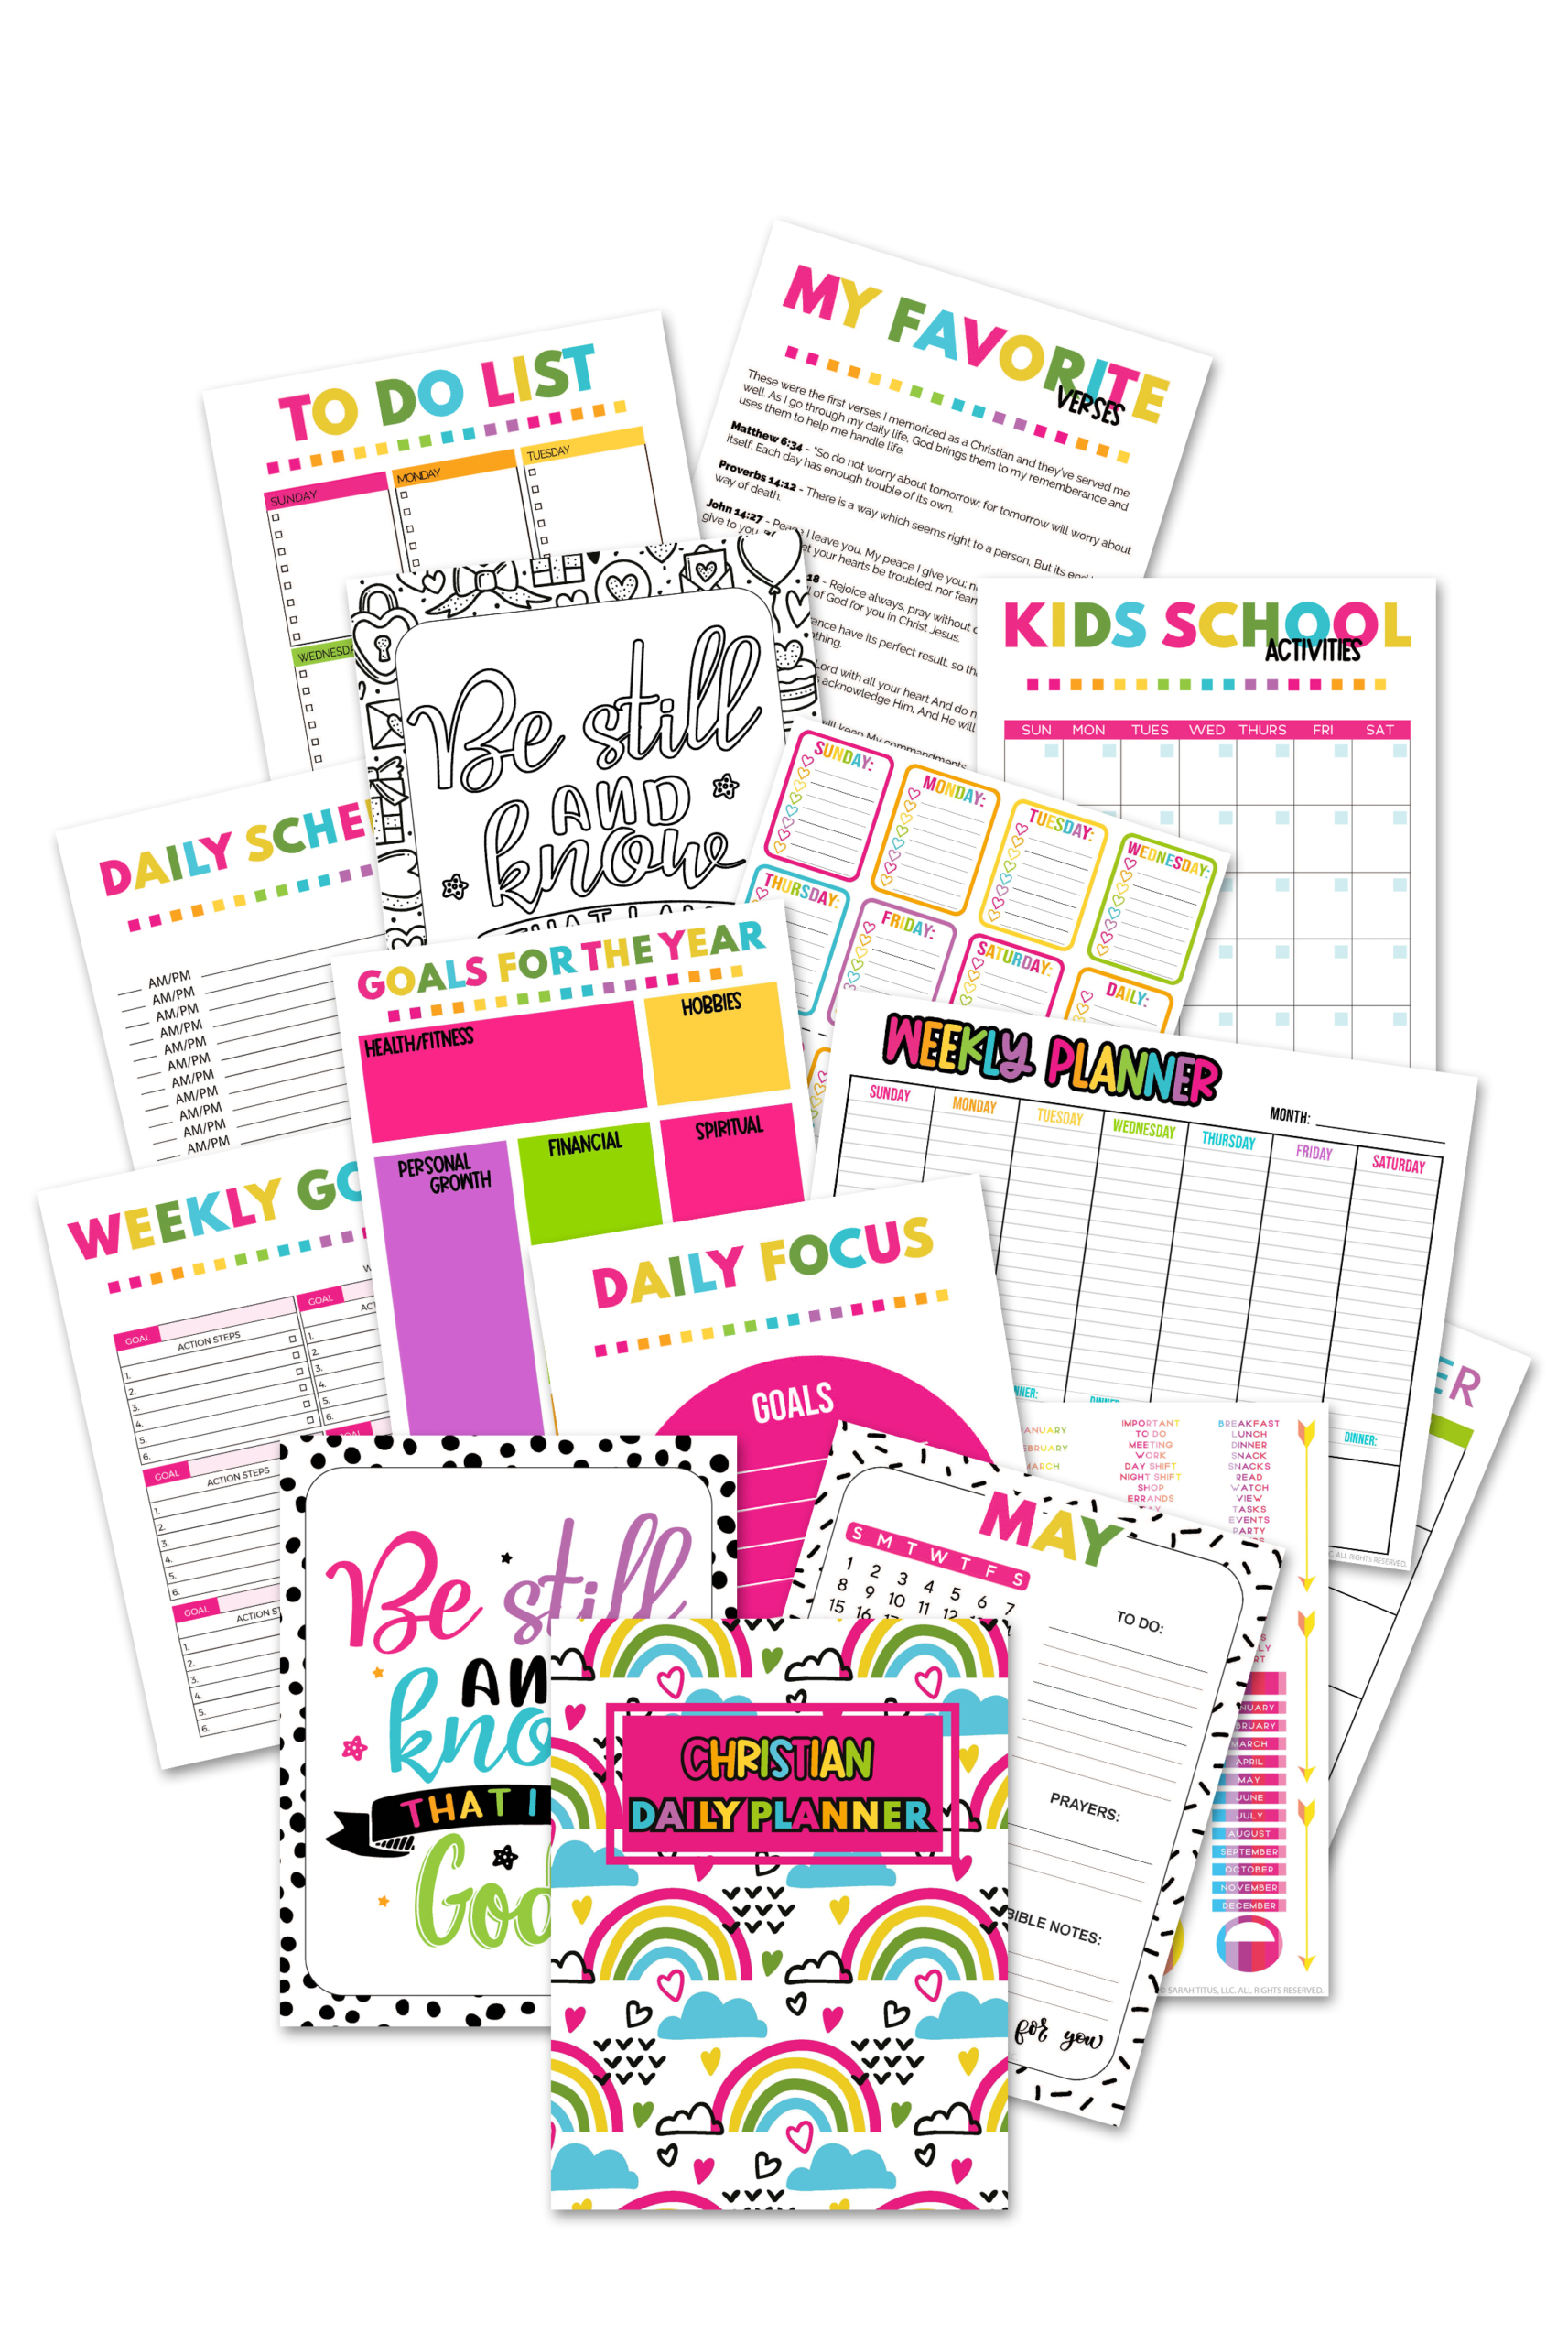 Christian Sticker and Planner Sheets - 16 Sheets